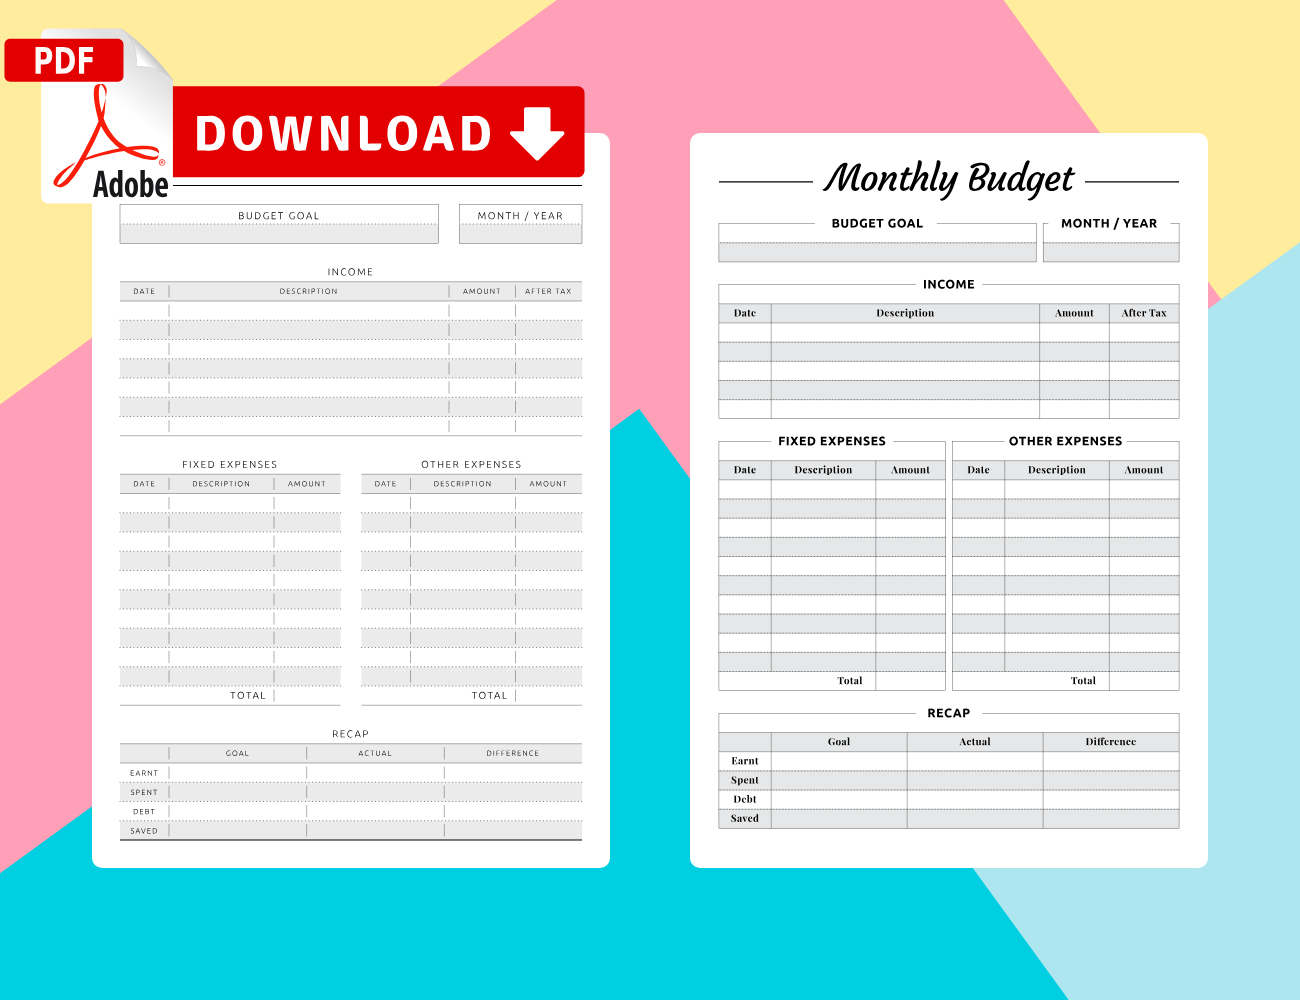 Monthly Budget Planner Templates - Download Pdf regarding Budget Planner Free Template